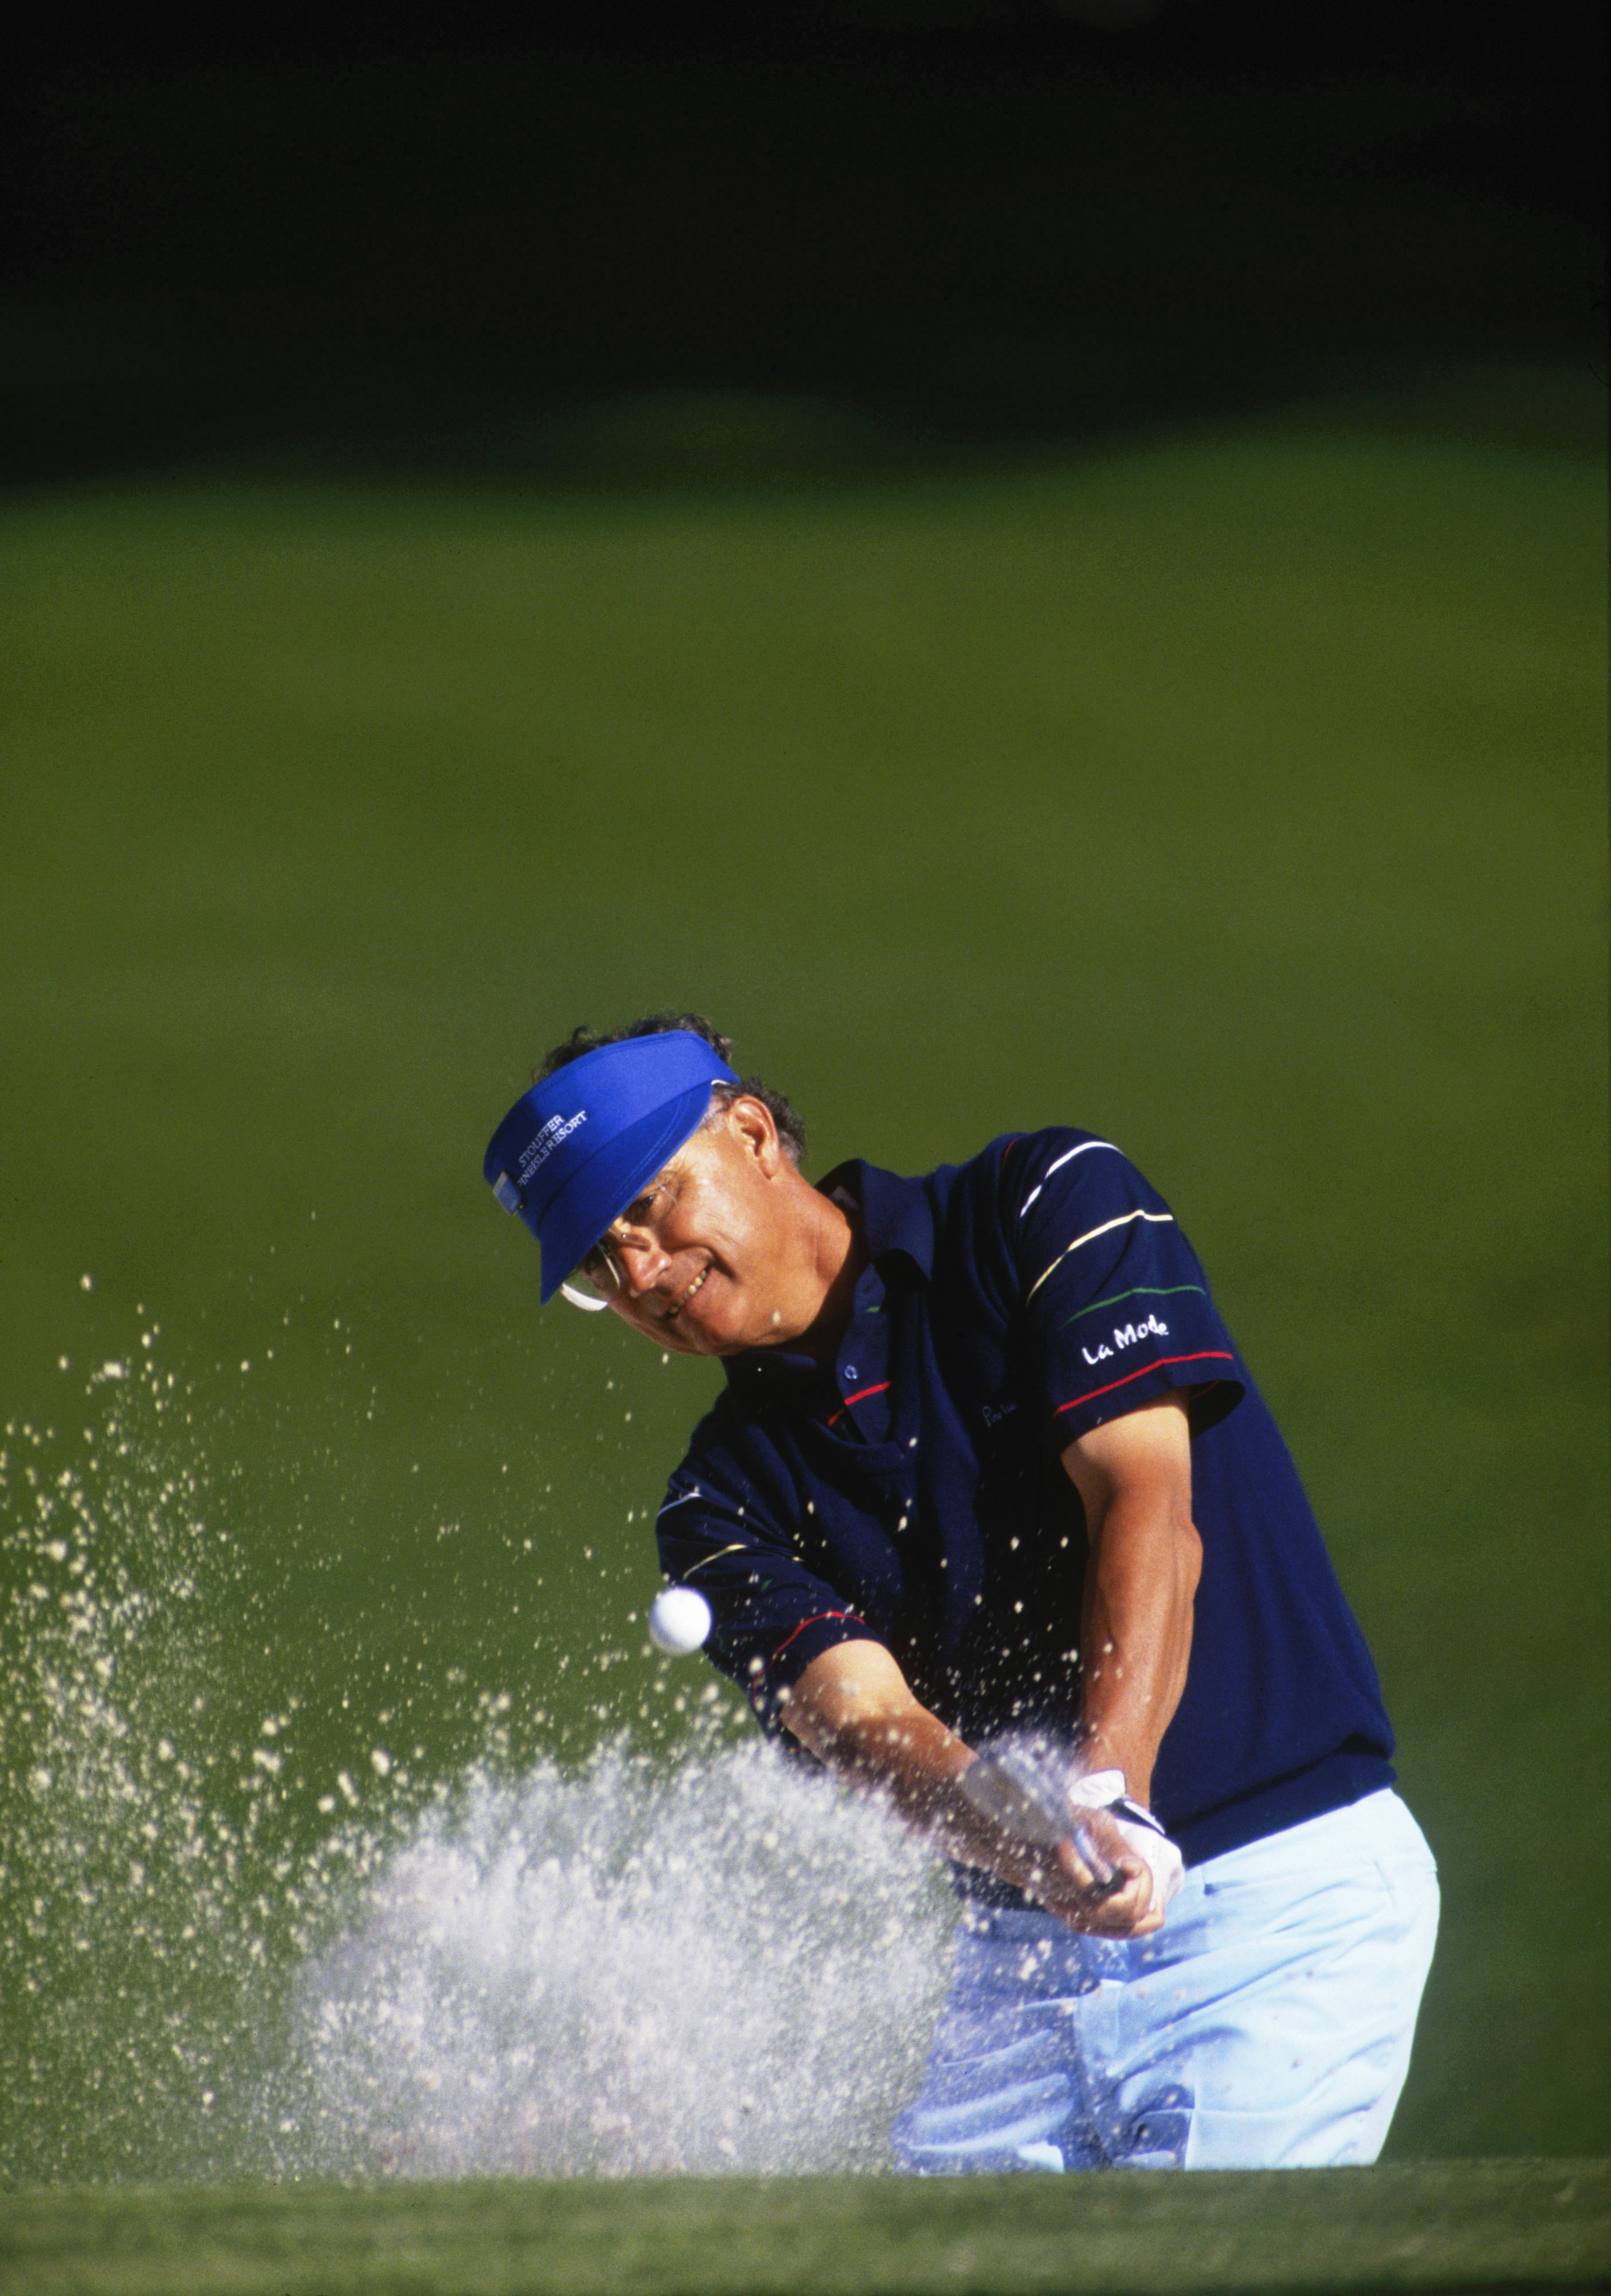 AUGUSTA,GA - APRIL 12: Tommy Aaron of USA plays out of a bunker during the final round of the Masters, held at The Augusta National Golf Club on April 12, 1987  in Augusta, GA.  (Photo by David Cannon/Getty Images)